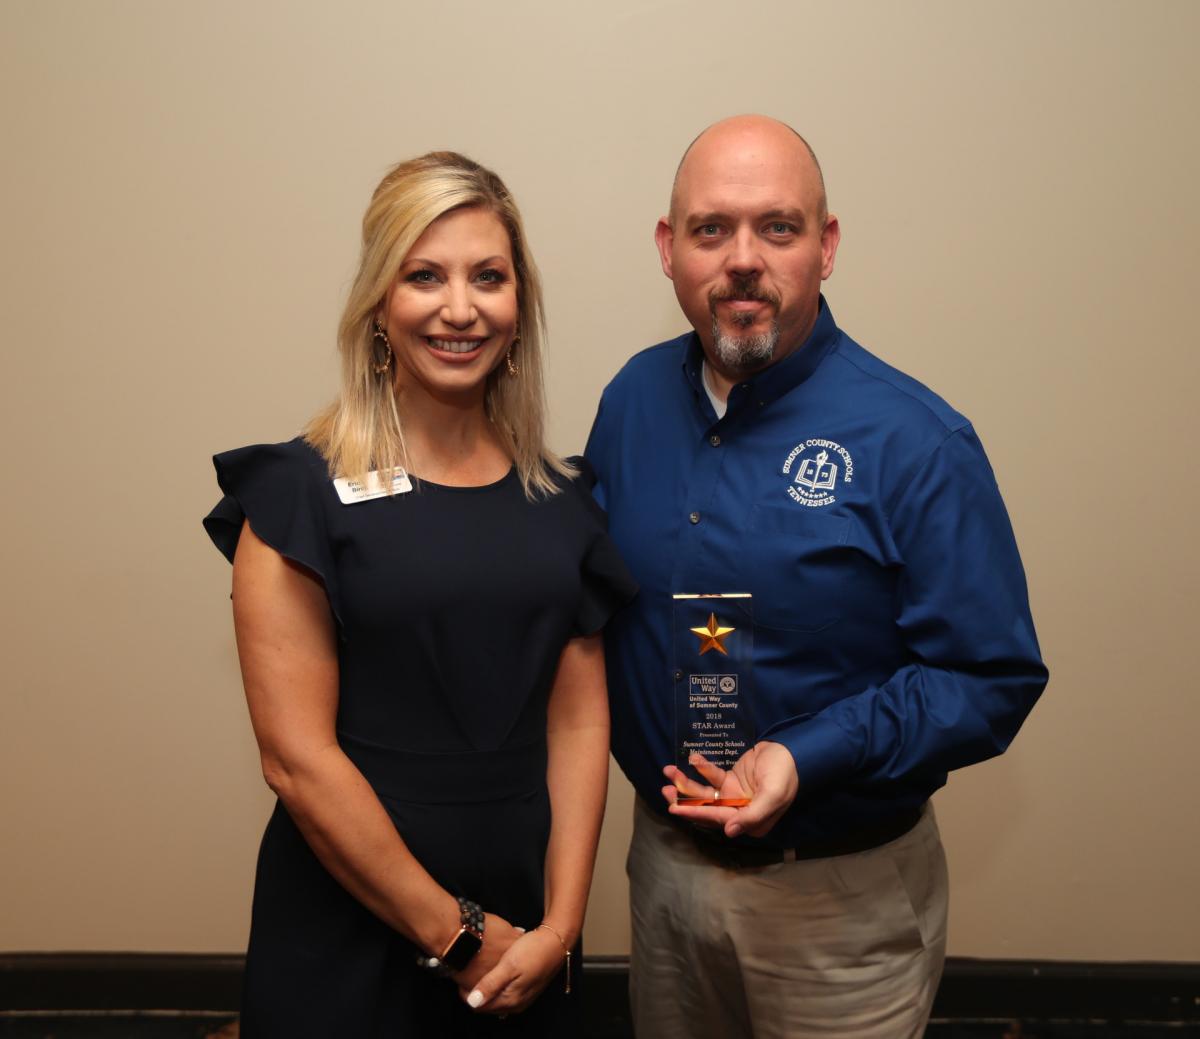 UWSC Chief Develpment Officer Erin Birch presents the award for Best Campaign Event to Sumner County Assistant Director of Schools for Facilities and Support Services Andy Brown for the Maintenance Deptartment's Vendor Fair, which raised more than $19,000 for United Way.